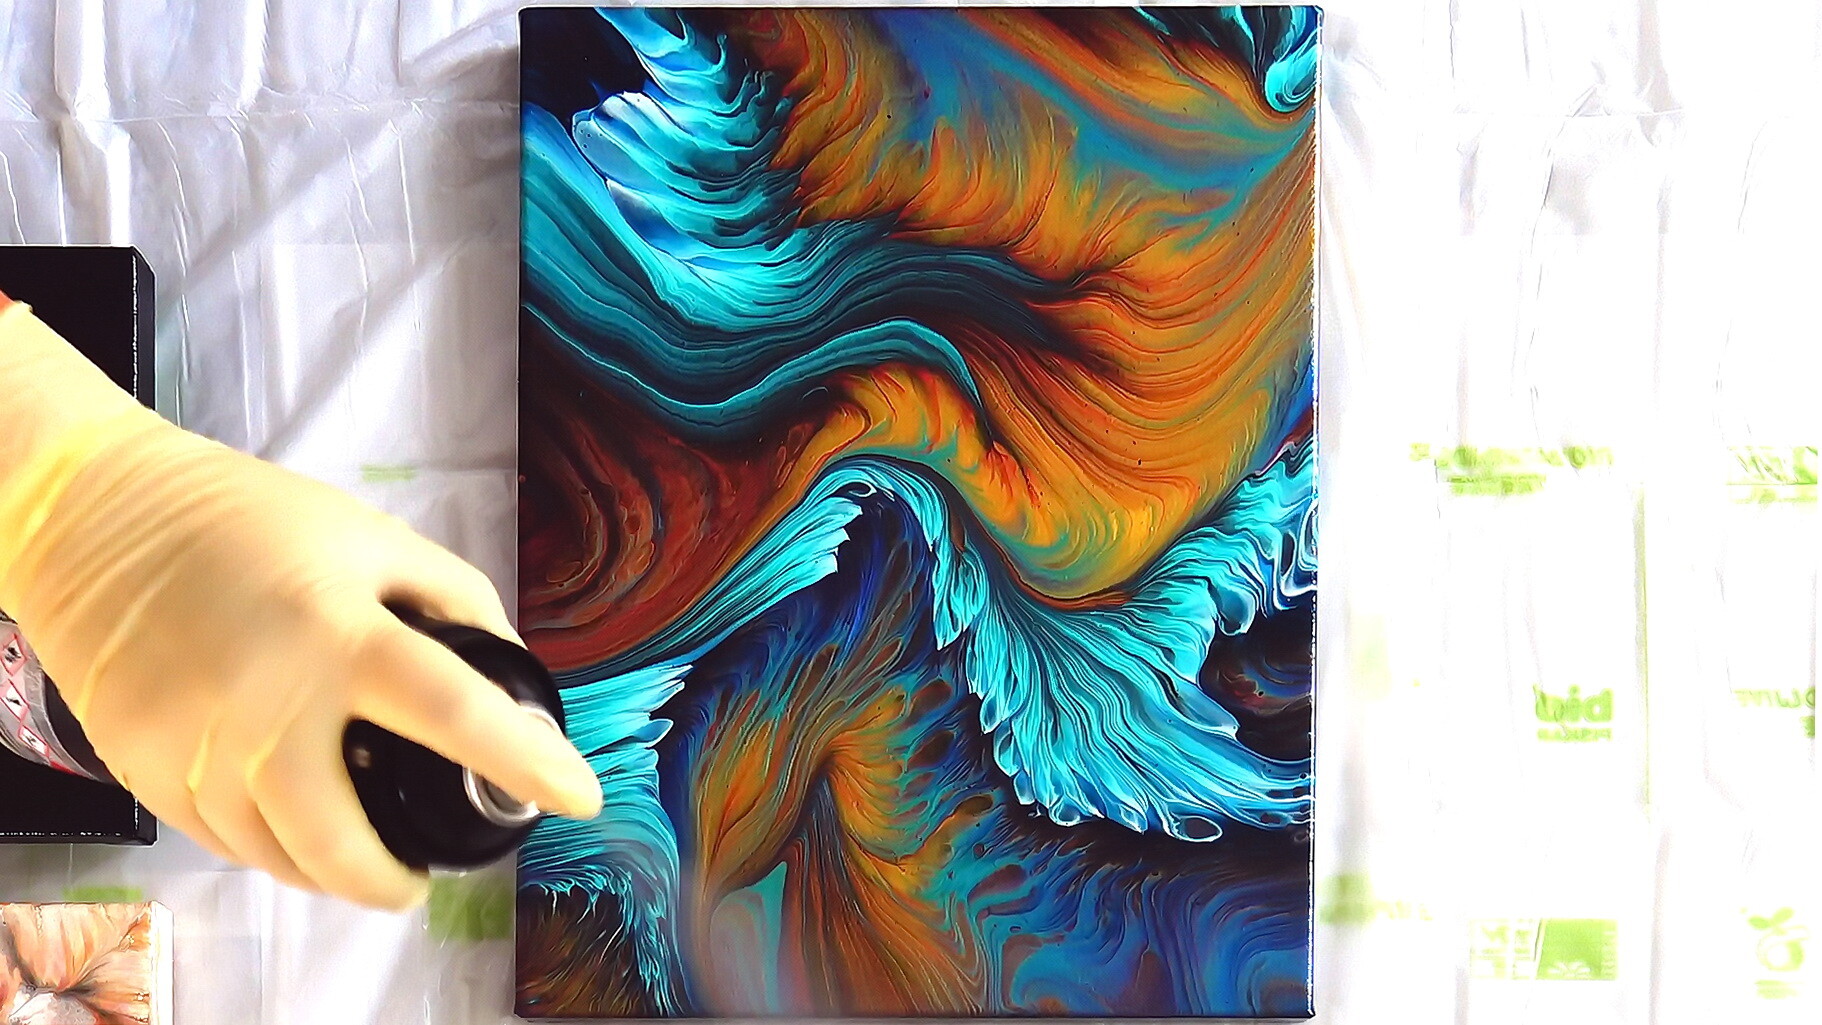 How To Clean And Varnish the Acrylic Pour Paintings with Silicon